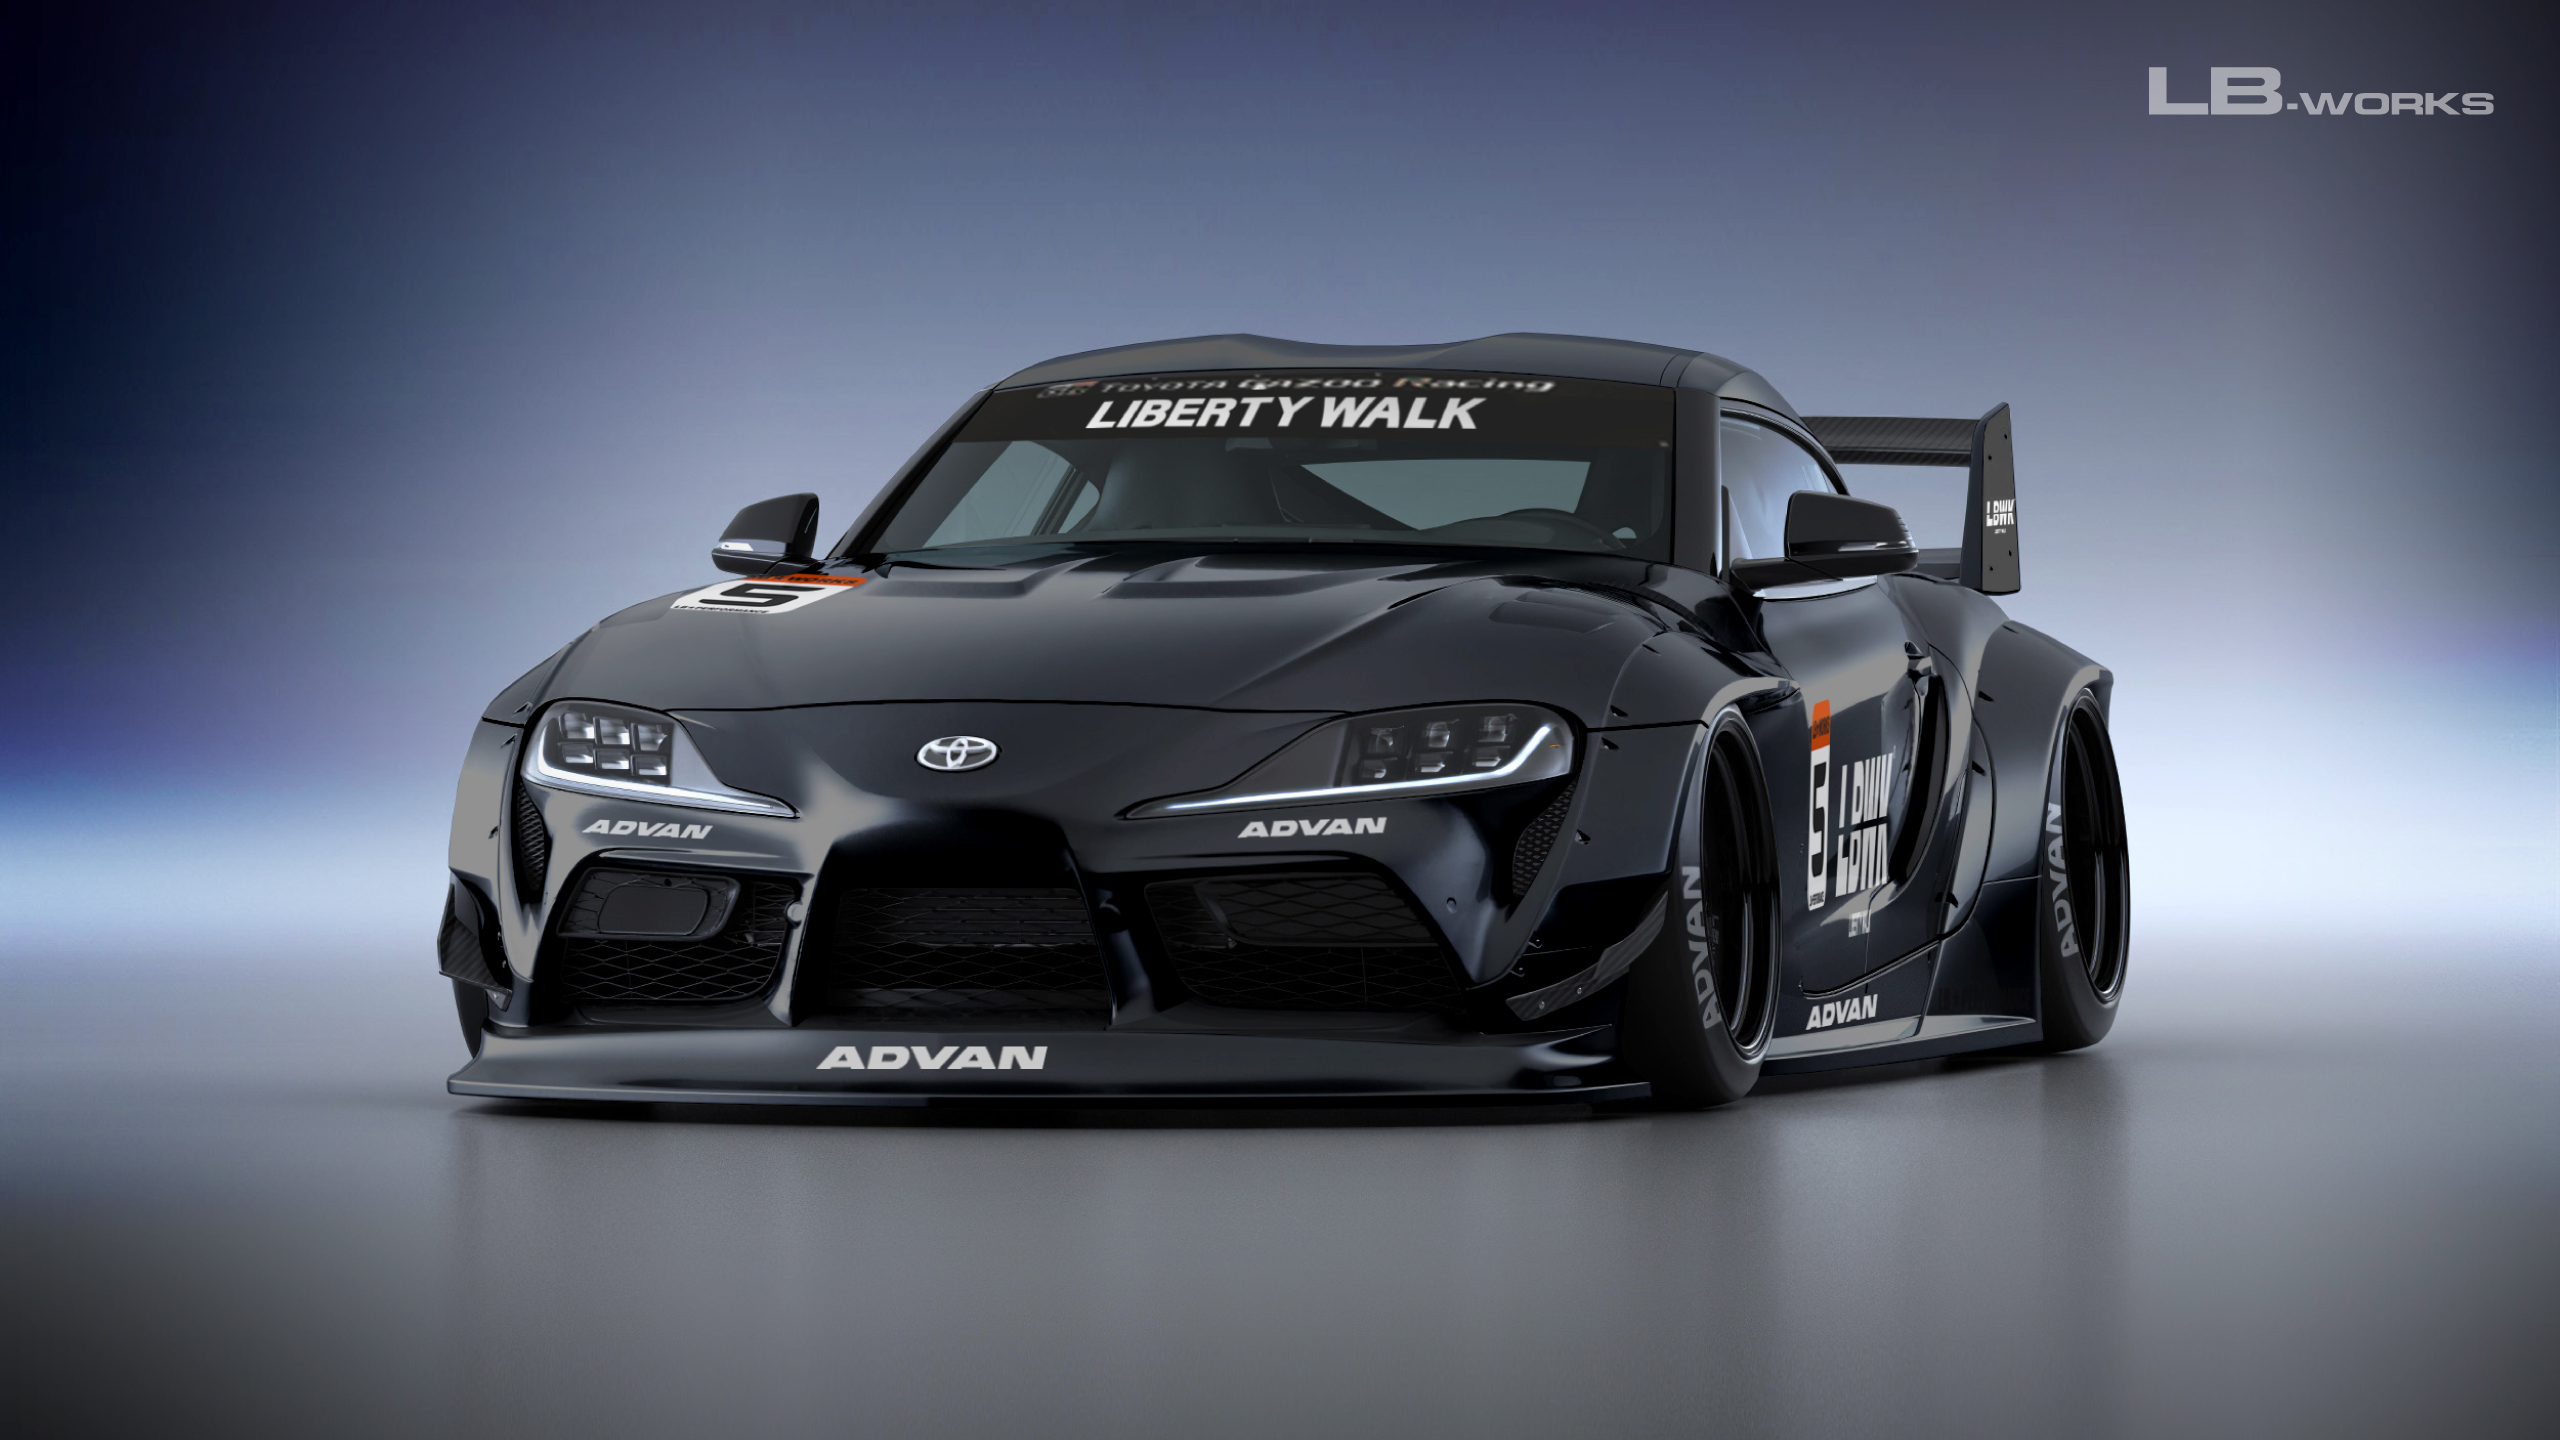 Toyota Supra A90 Wide Body Liberty Walk 8 Maxtuncars Images And